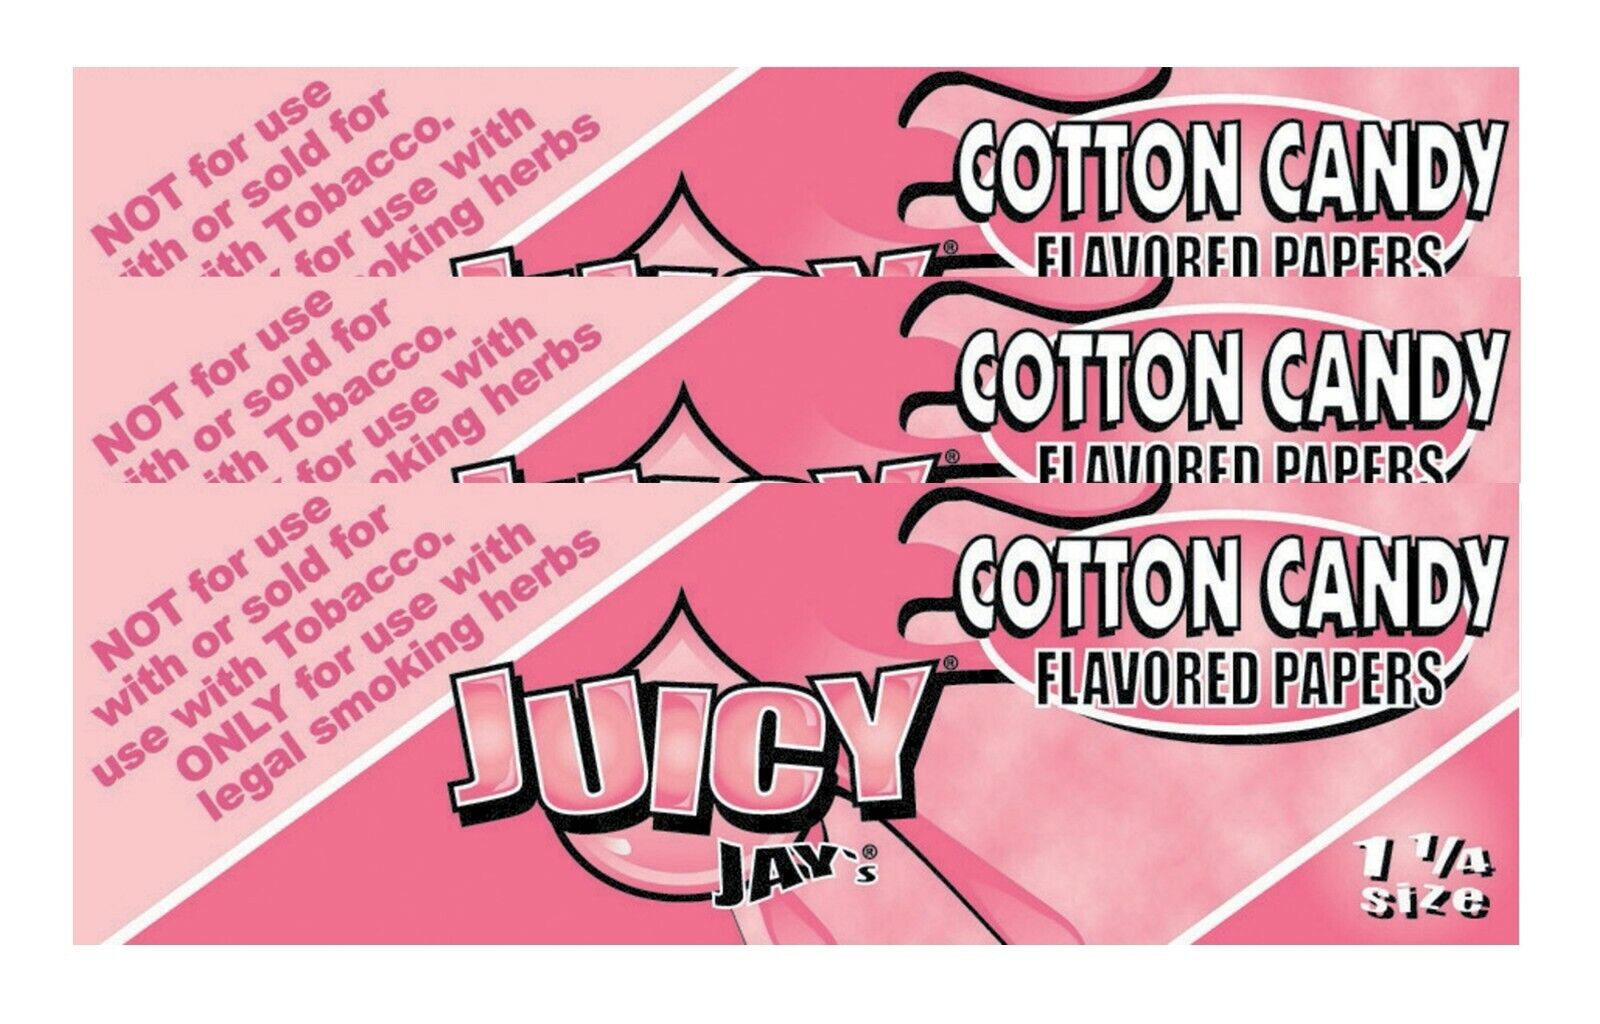 Juicy Jay's Cotton Candy Flavored Rolling Papers 1.25 3 Packs